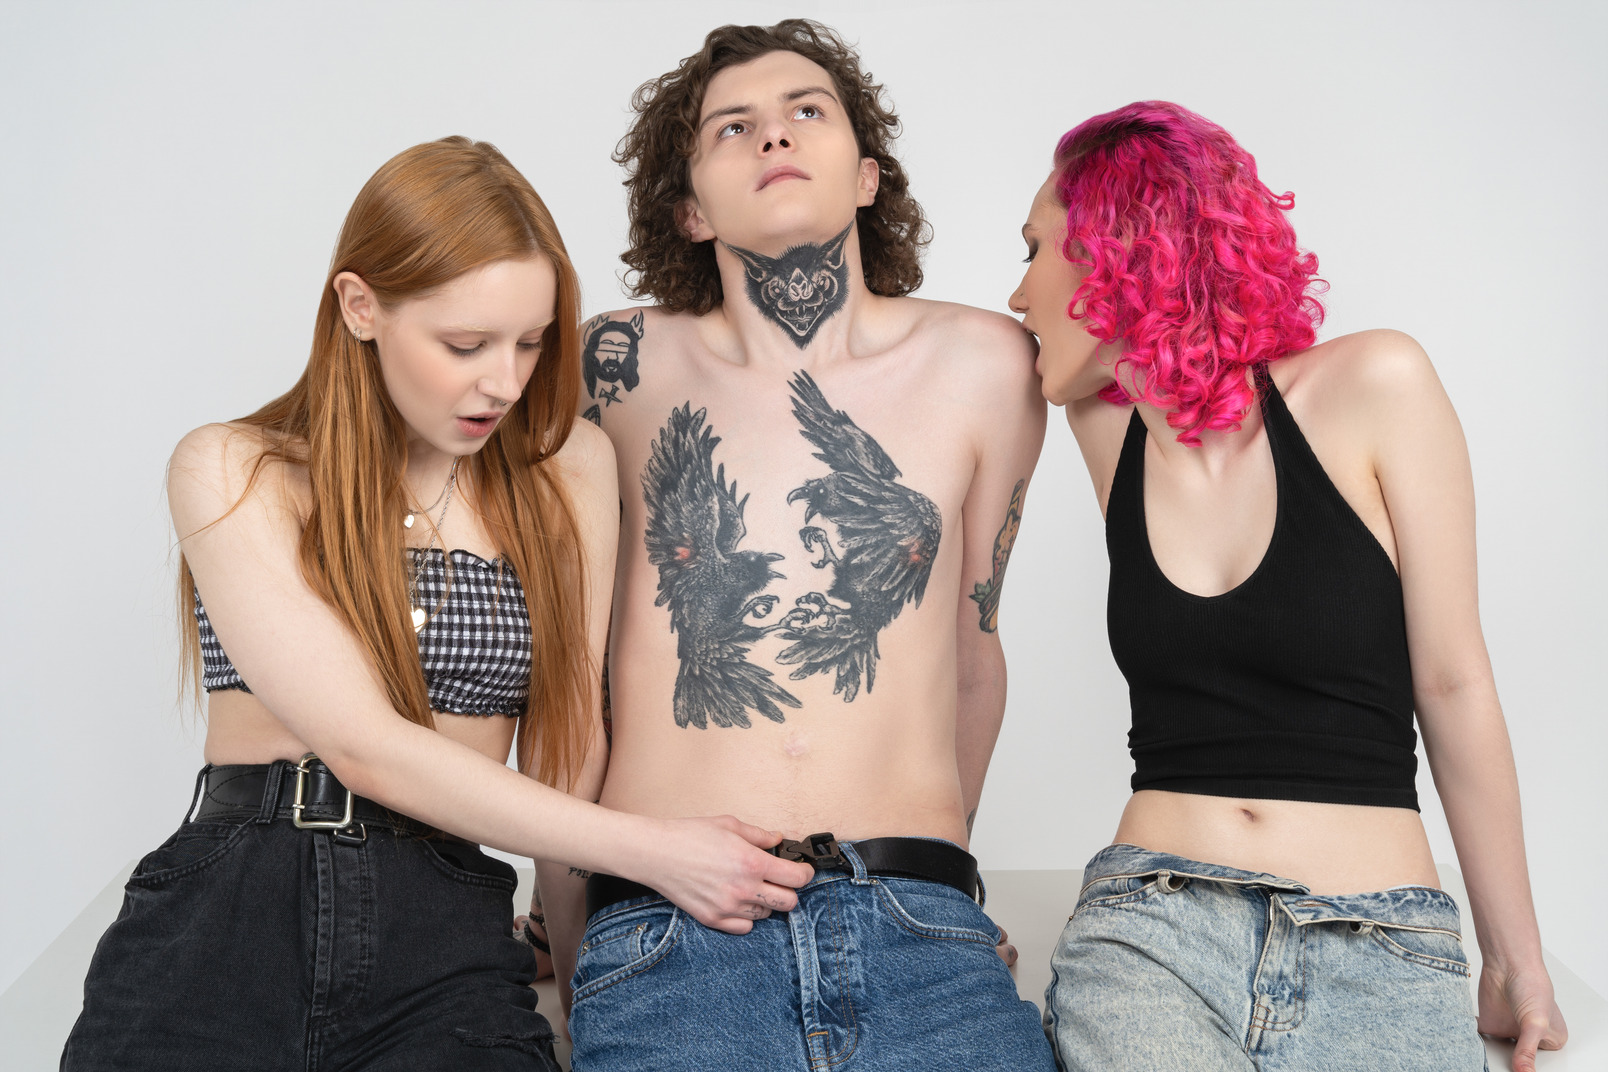 Young man surrounded by two passionate teenage girls